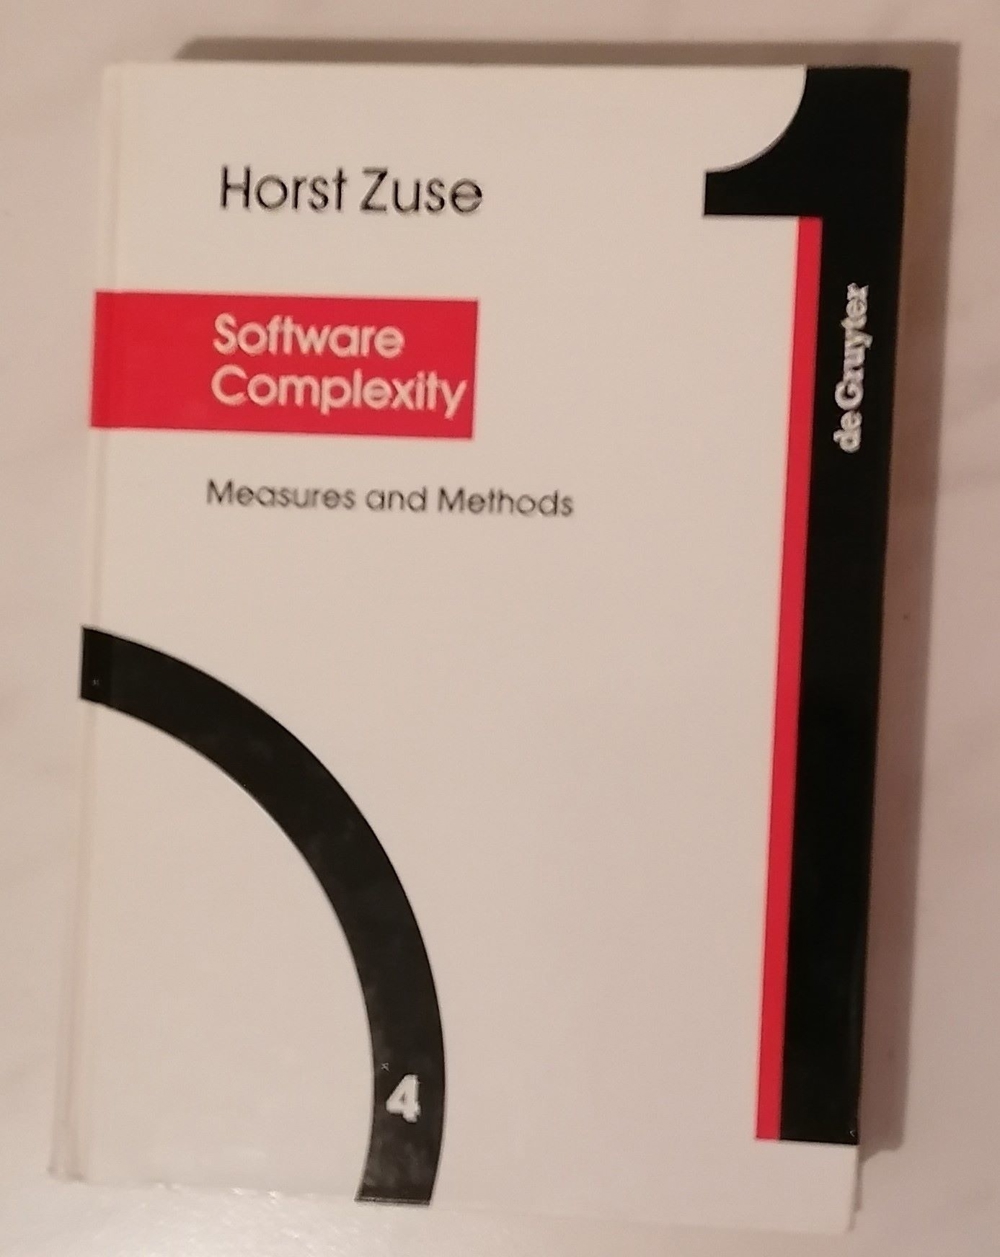 Software Complexity - Measures and Methods von Prof. Dr. Horst Zuse